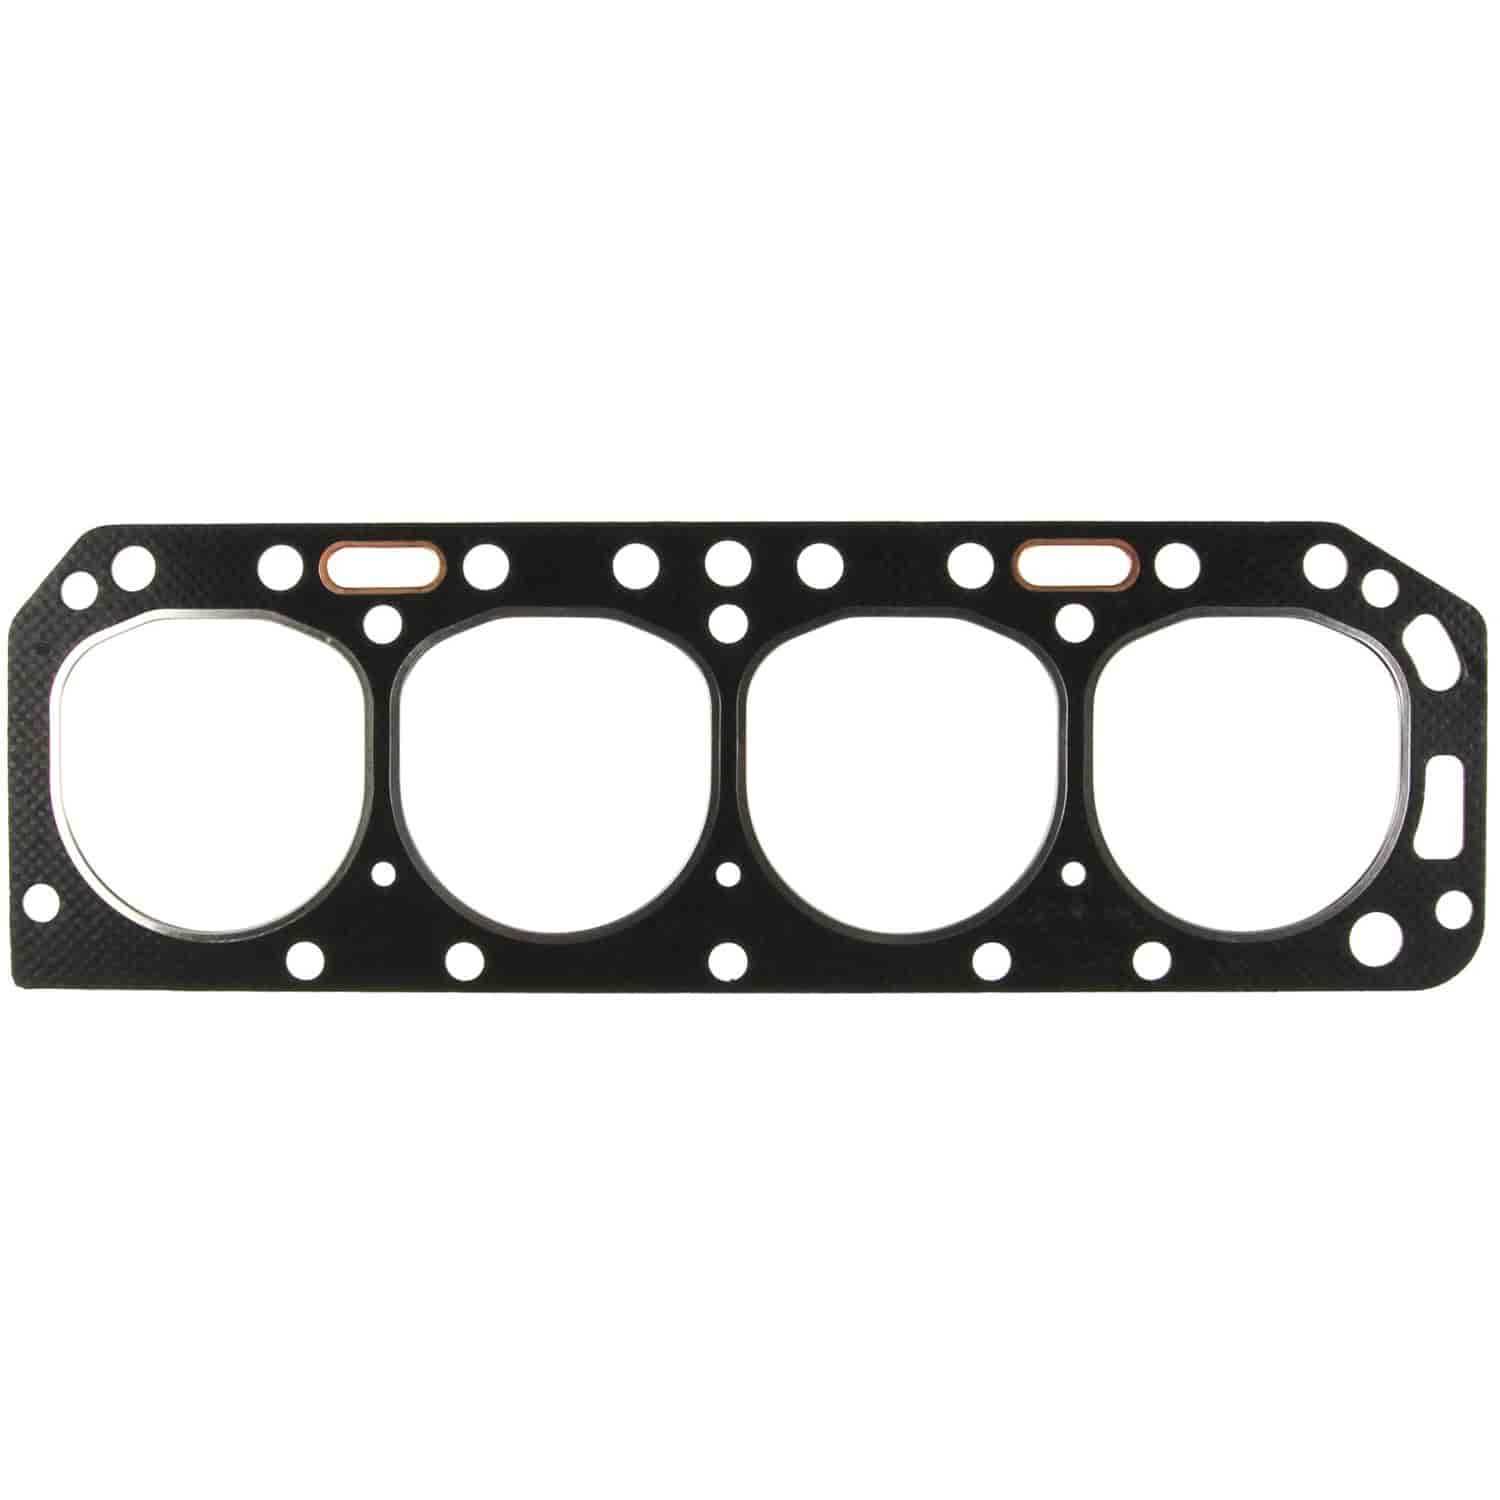 Cylinder Head Gasket for 1958-1981 Ford Industrial &